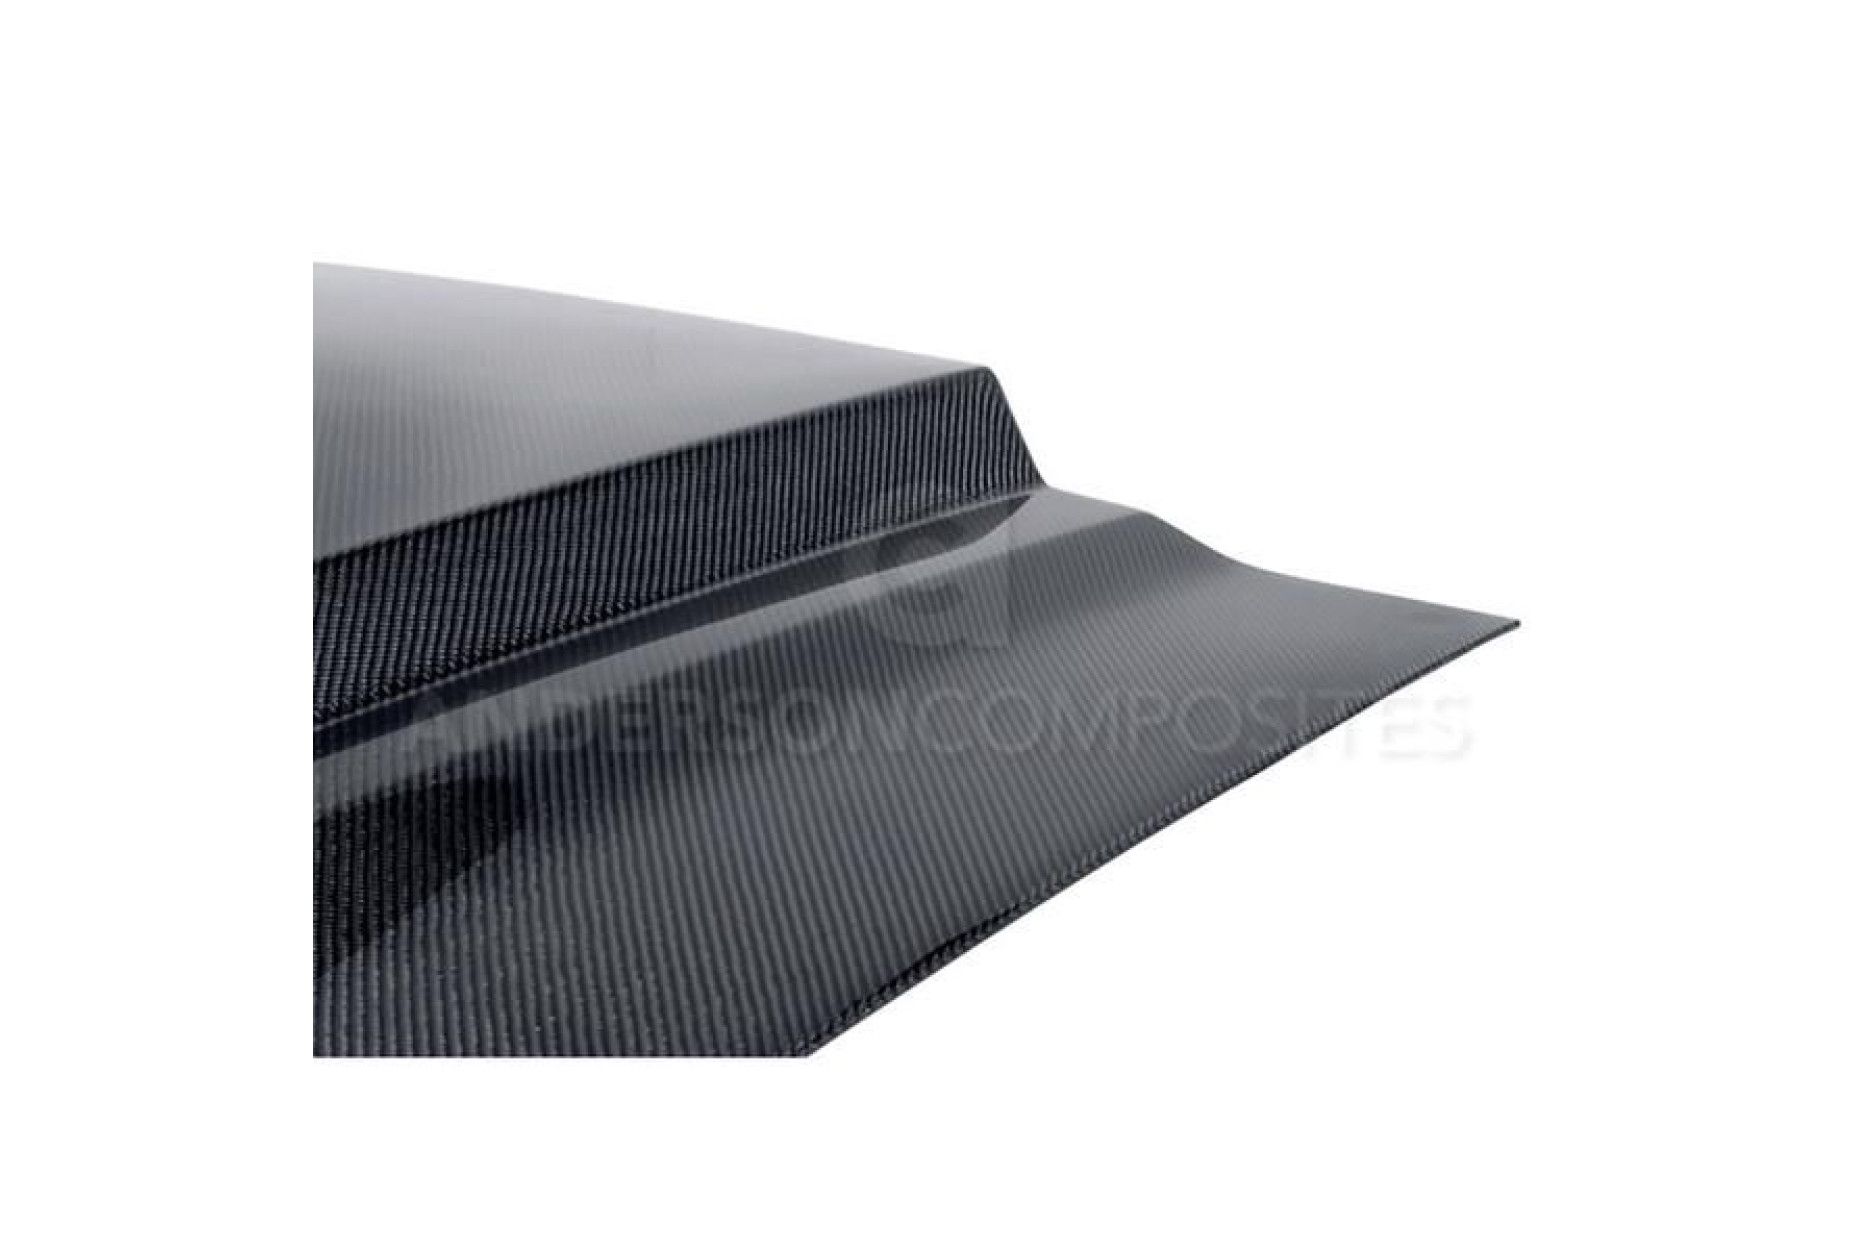 Anderson Composites Ram air type-CR carbon fiber hood for 2010-2014 Ford Mustang GT500 and 2013-2014 Mustang GT/V6 (6) 